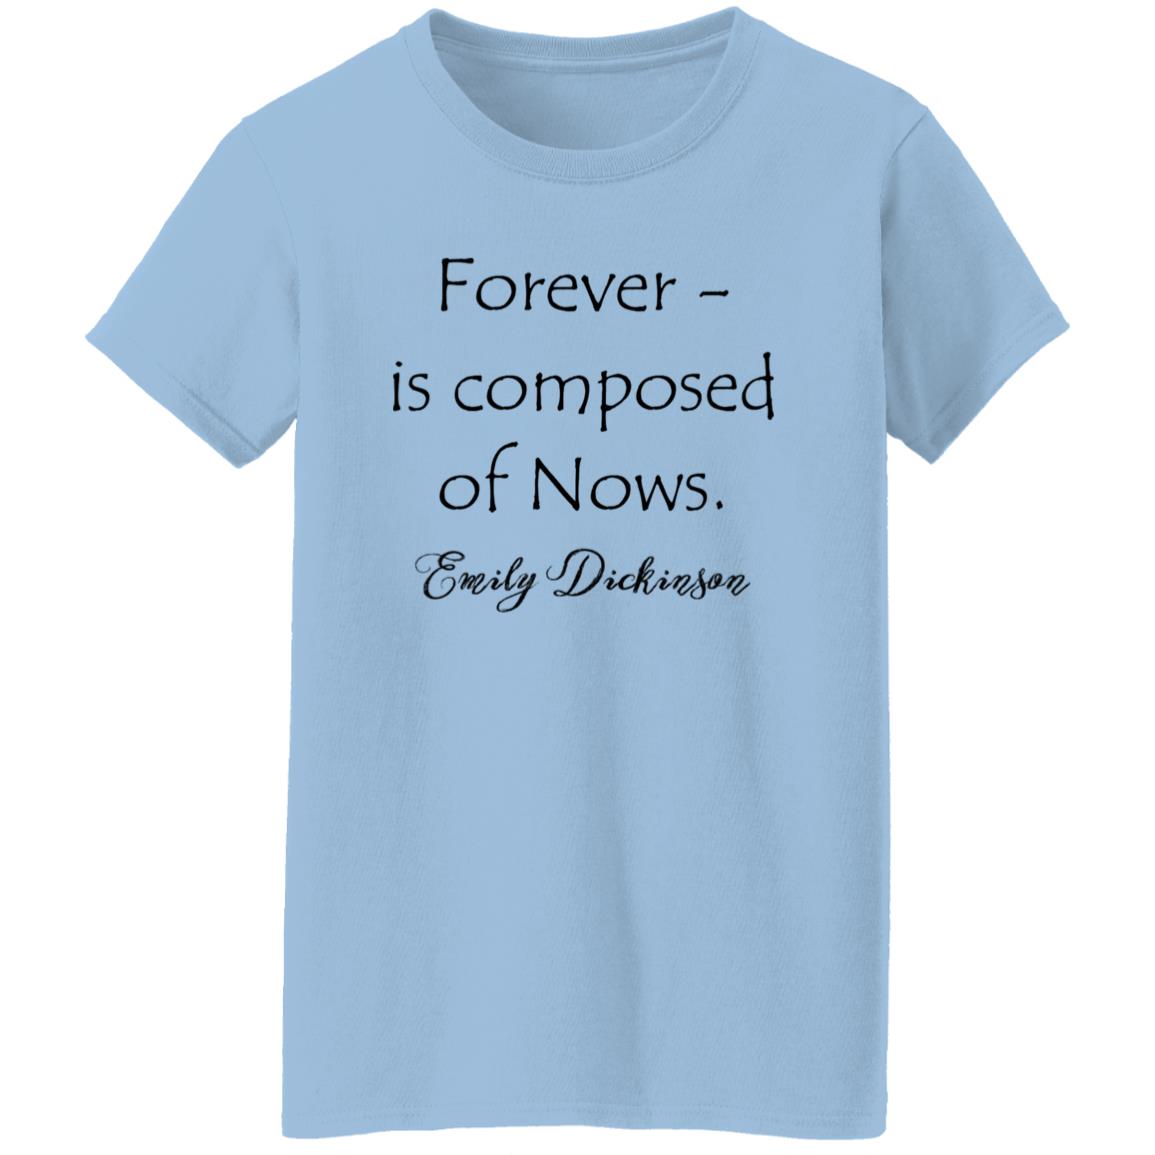 Emily Dickinson Forever - is composed of Nows. T-Shirt